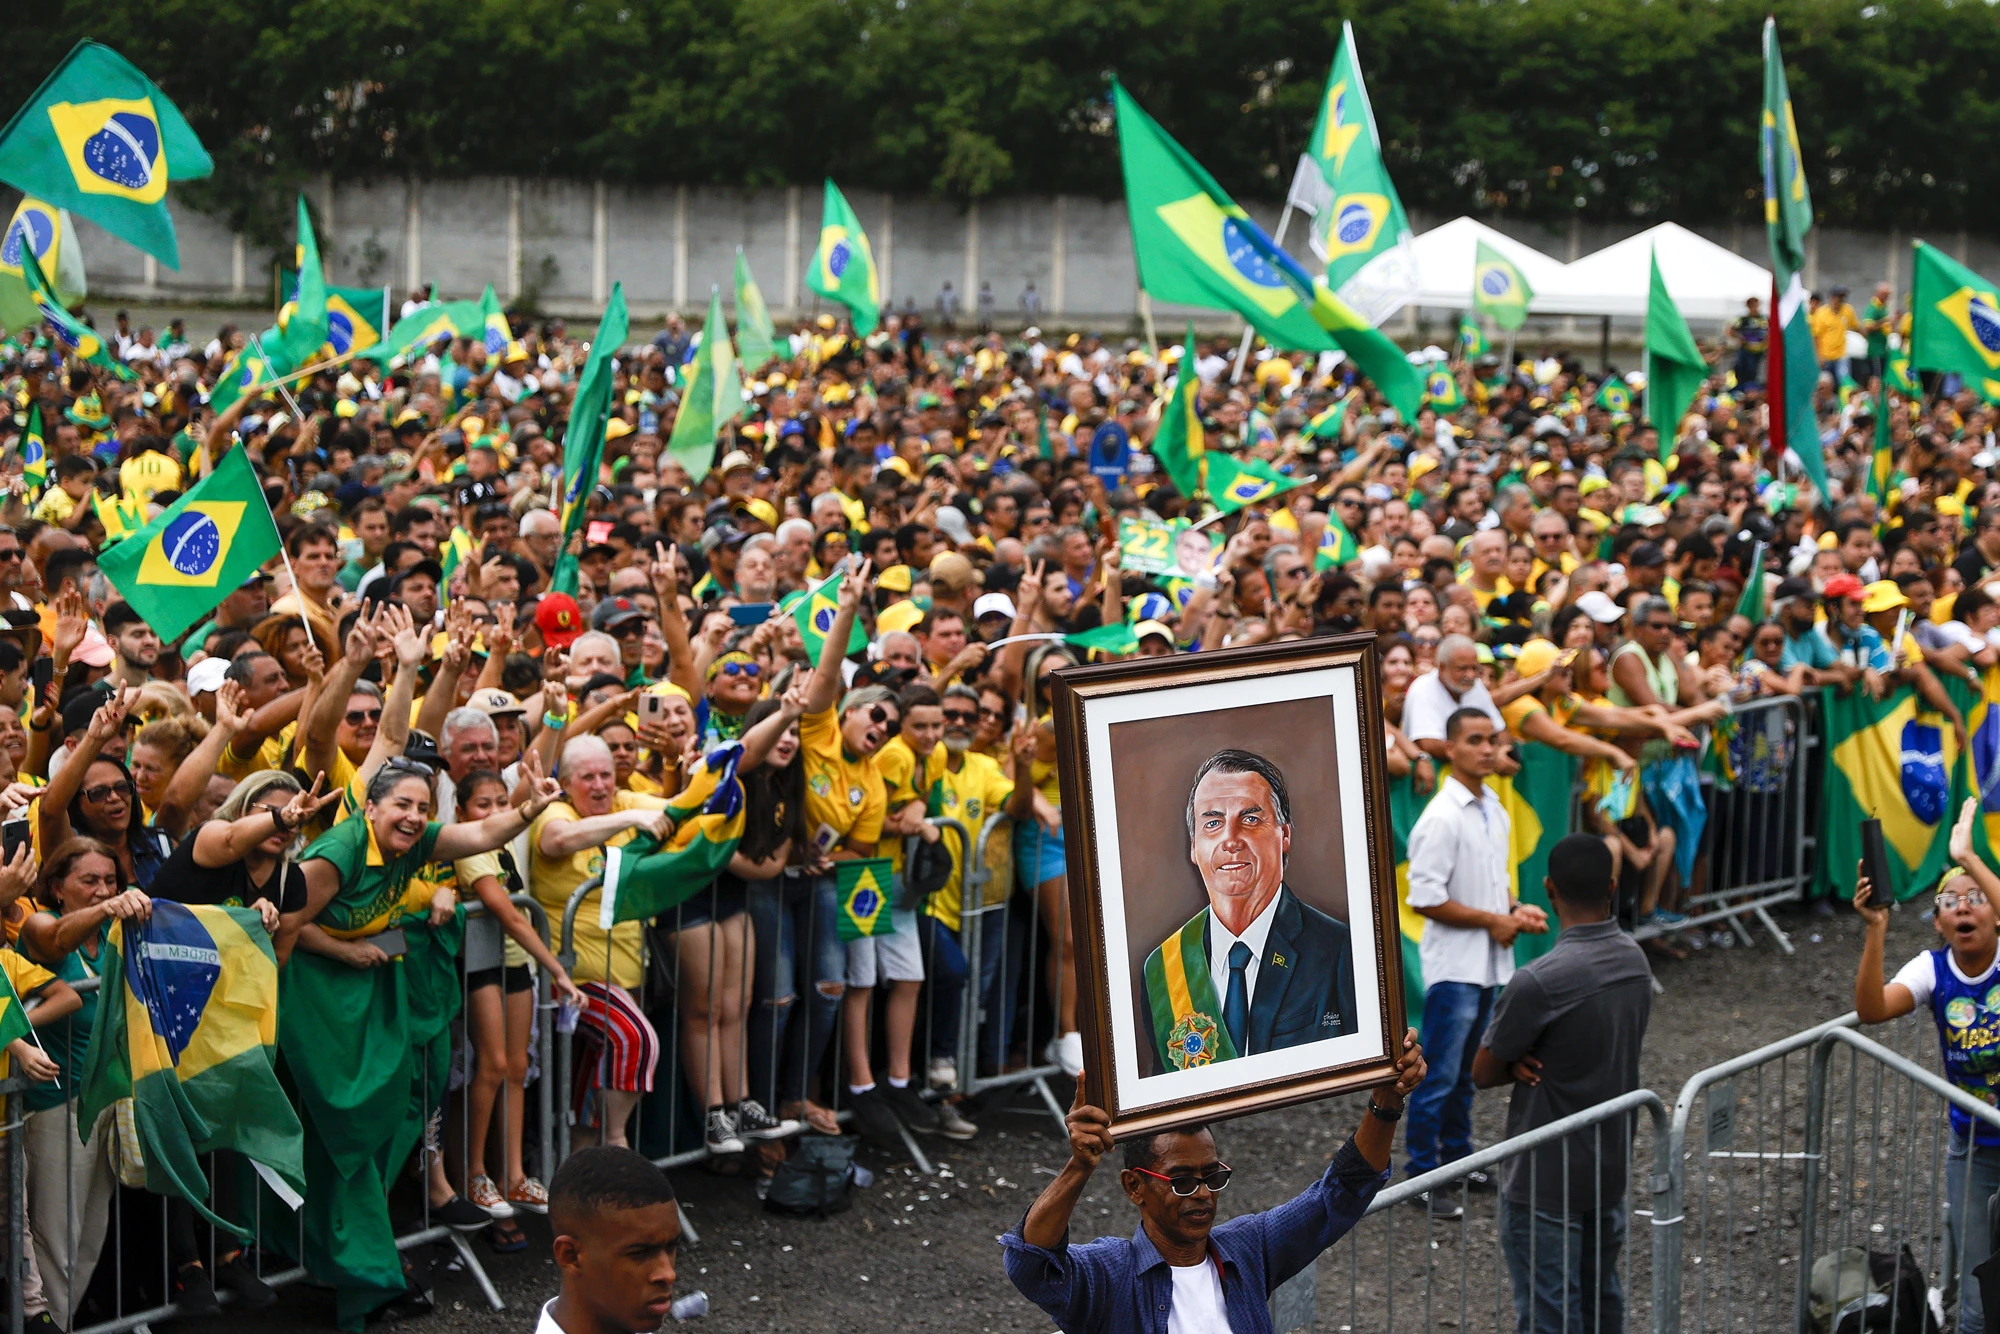 A supporter displays a painting of President of Brazil and presidential candidate Jair Bolsonaro during a rally organized by Liberal Party as part of the campaign ahead of presidential run-off on October 18, 2022 in Sao Goncalo, Brazil.